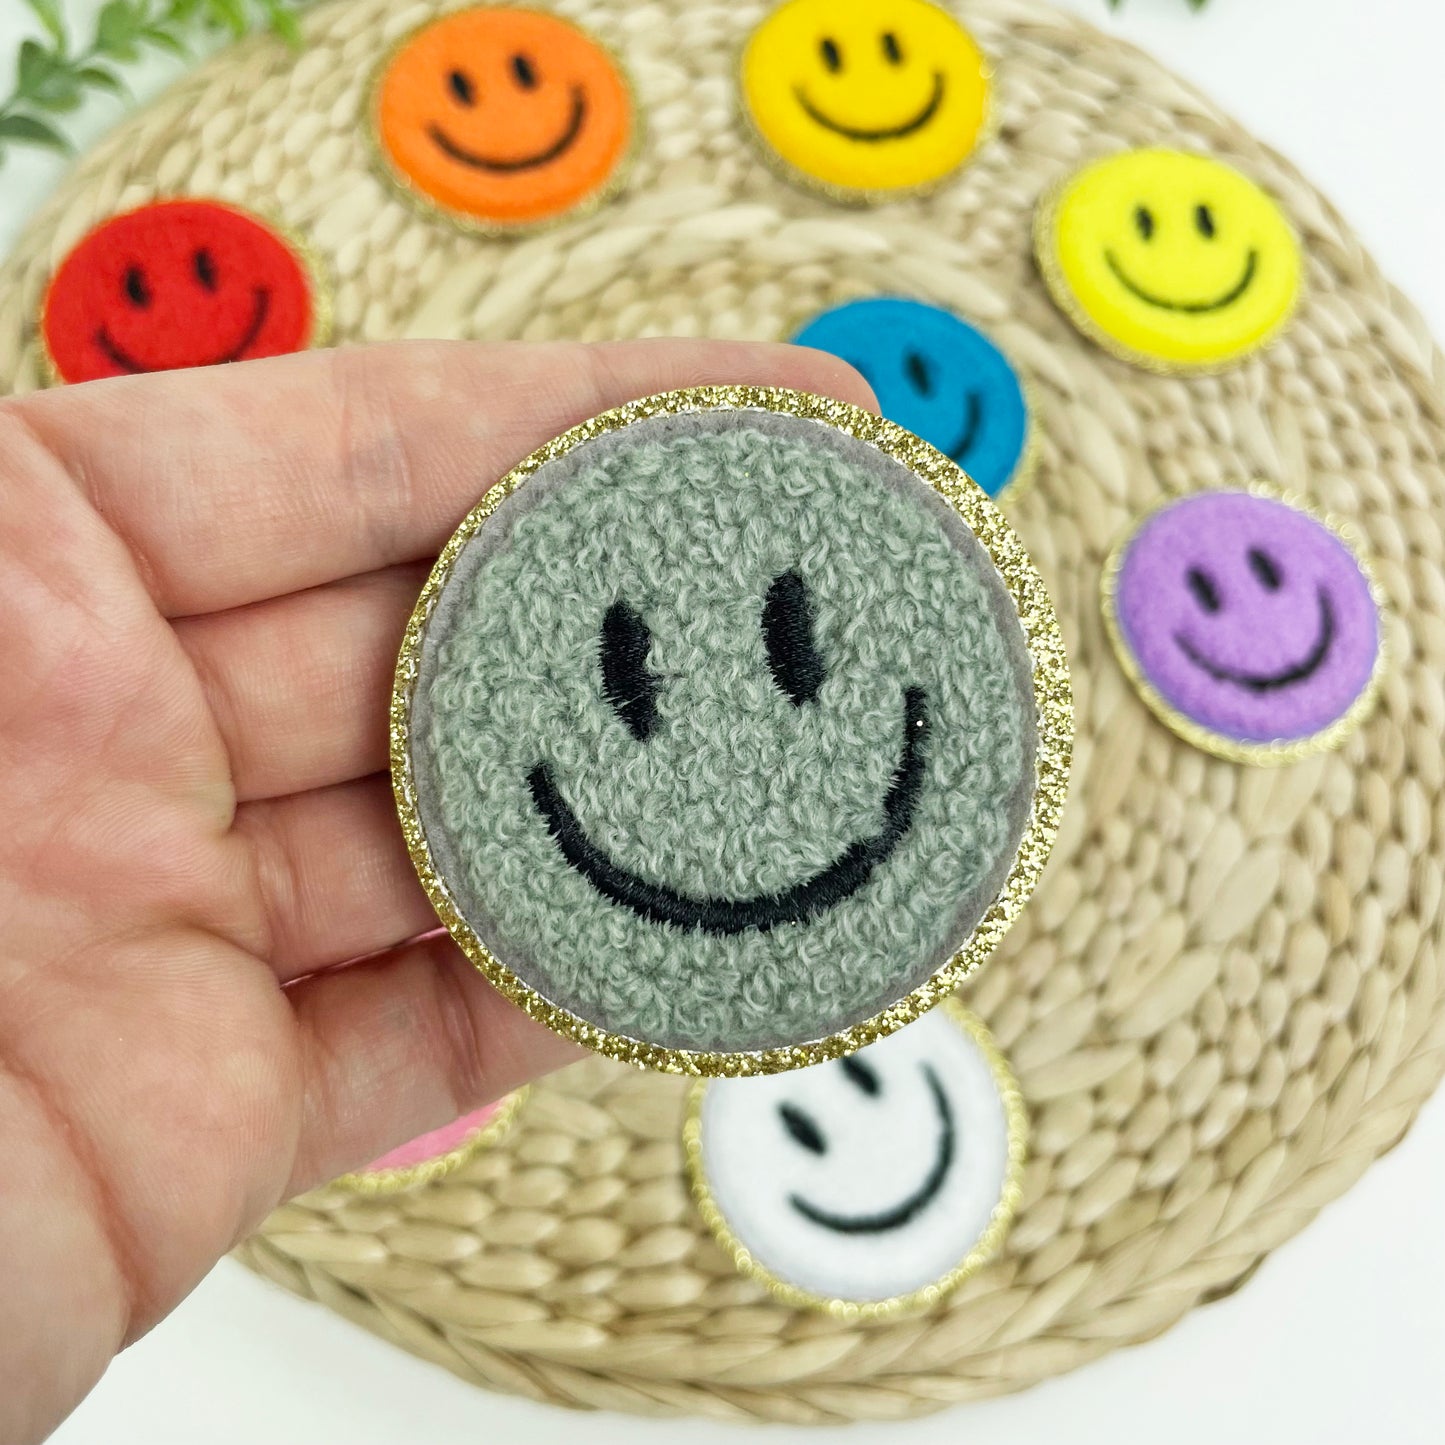 Colorful Smile Chenille Embroidered Patches, Iron-On for Hats